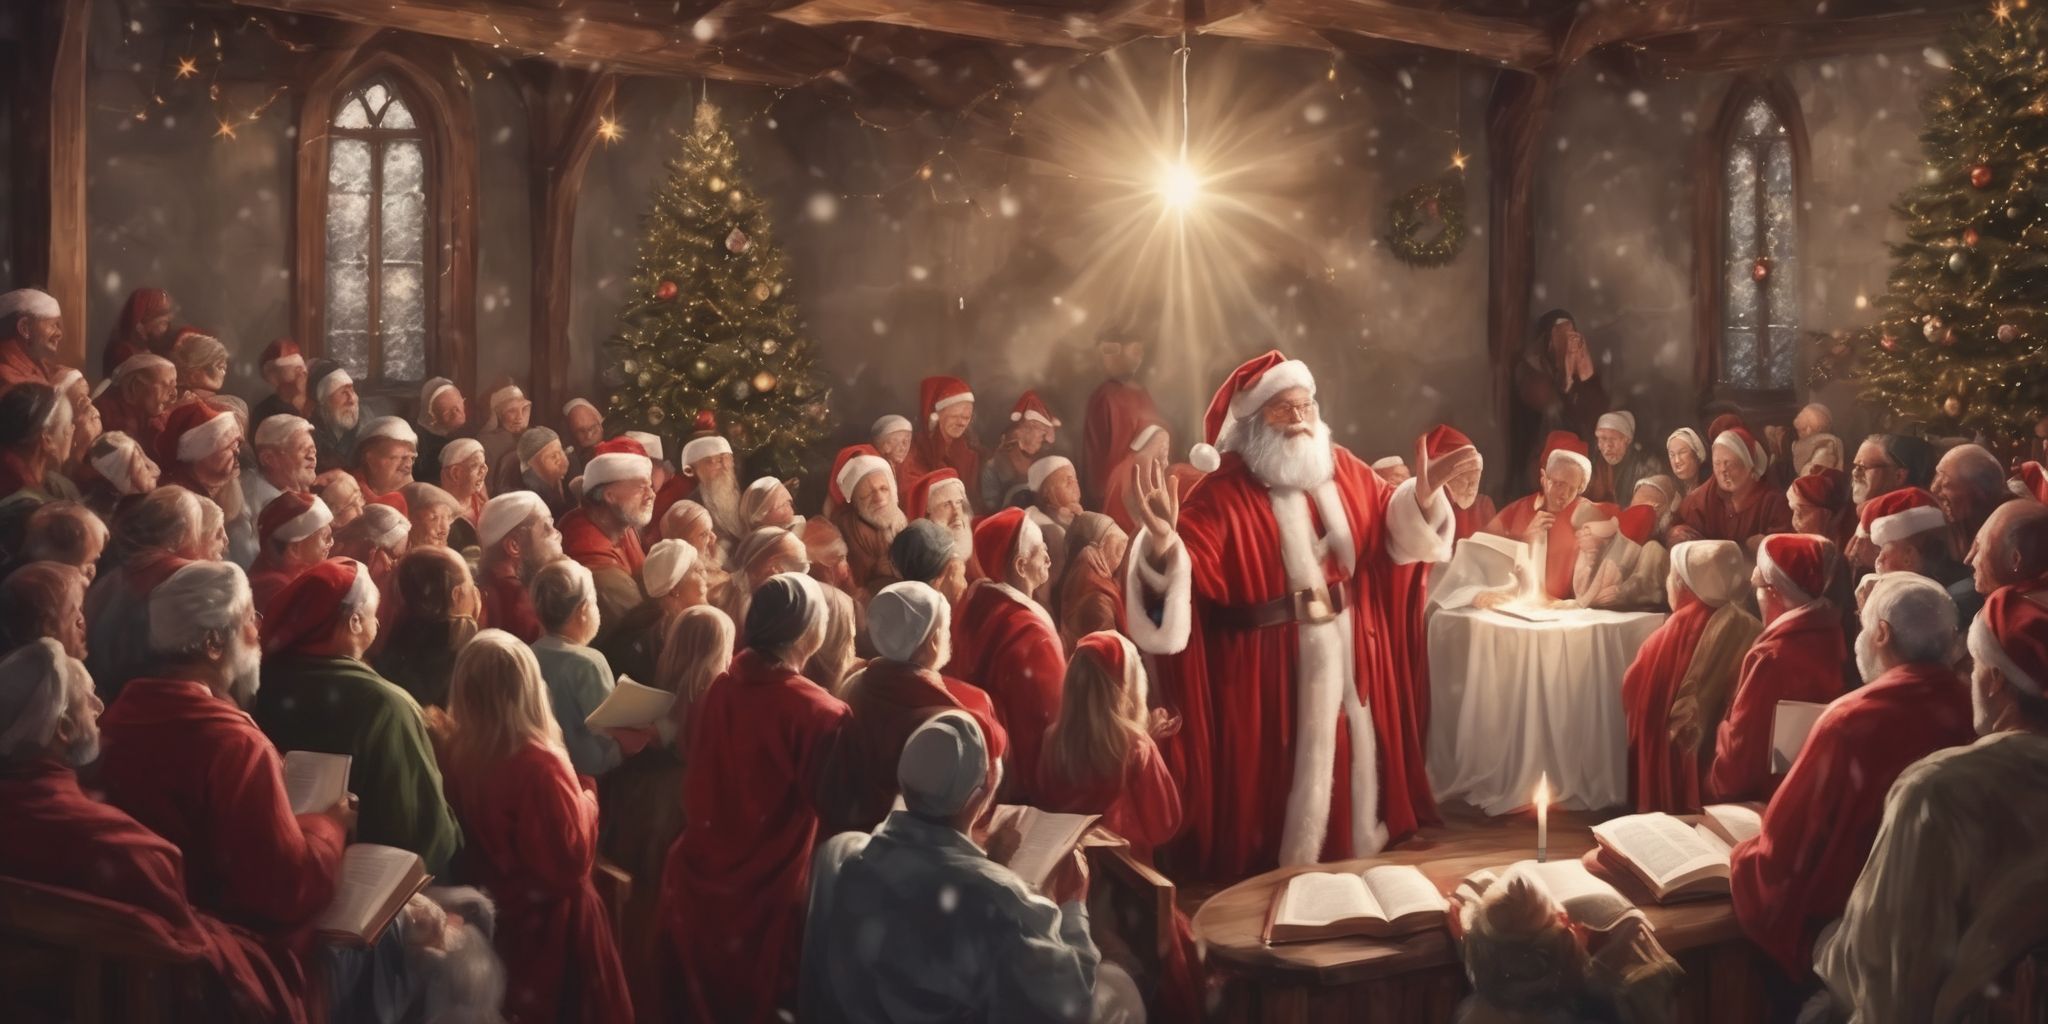 Sermon in realistic Christmas style